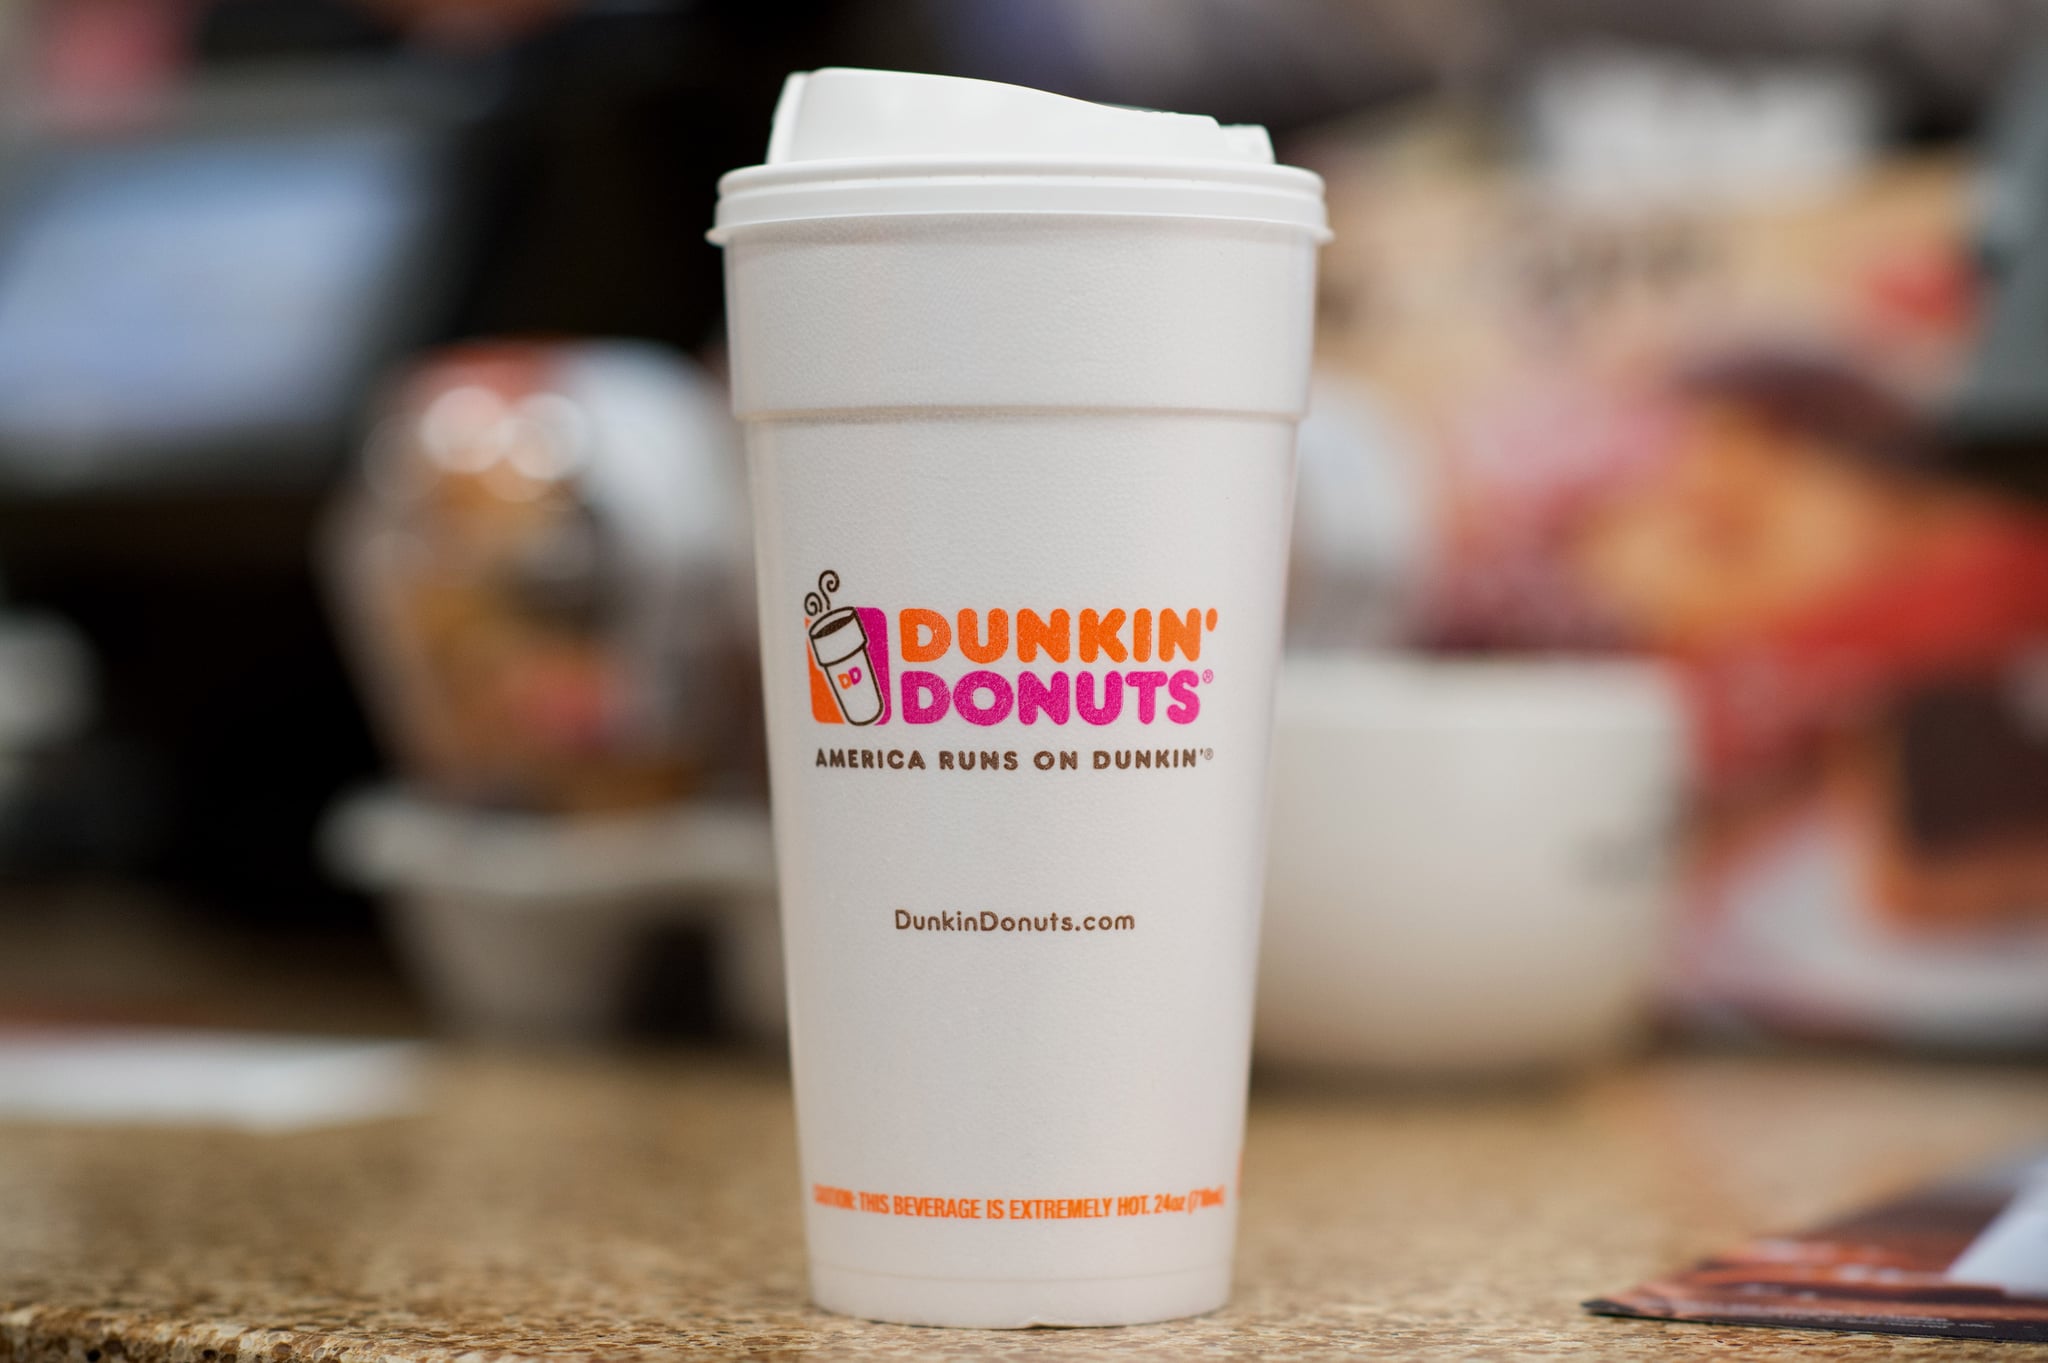 A cup with coffee is displayed for a photograph at a Dunkin Donuts Inc. store in Manhattan, New York, U.S., on Wednesday, Feb. 5, 2014. Dunkin Donuts Inc. is scheduled to release earnings figures on Feb. 6. Photographer: Craig Warga/Bloomberg via Getty Images